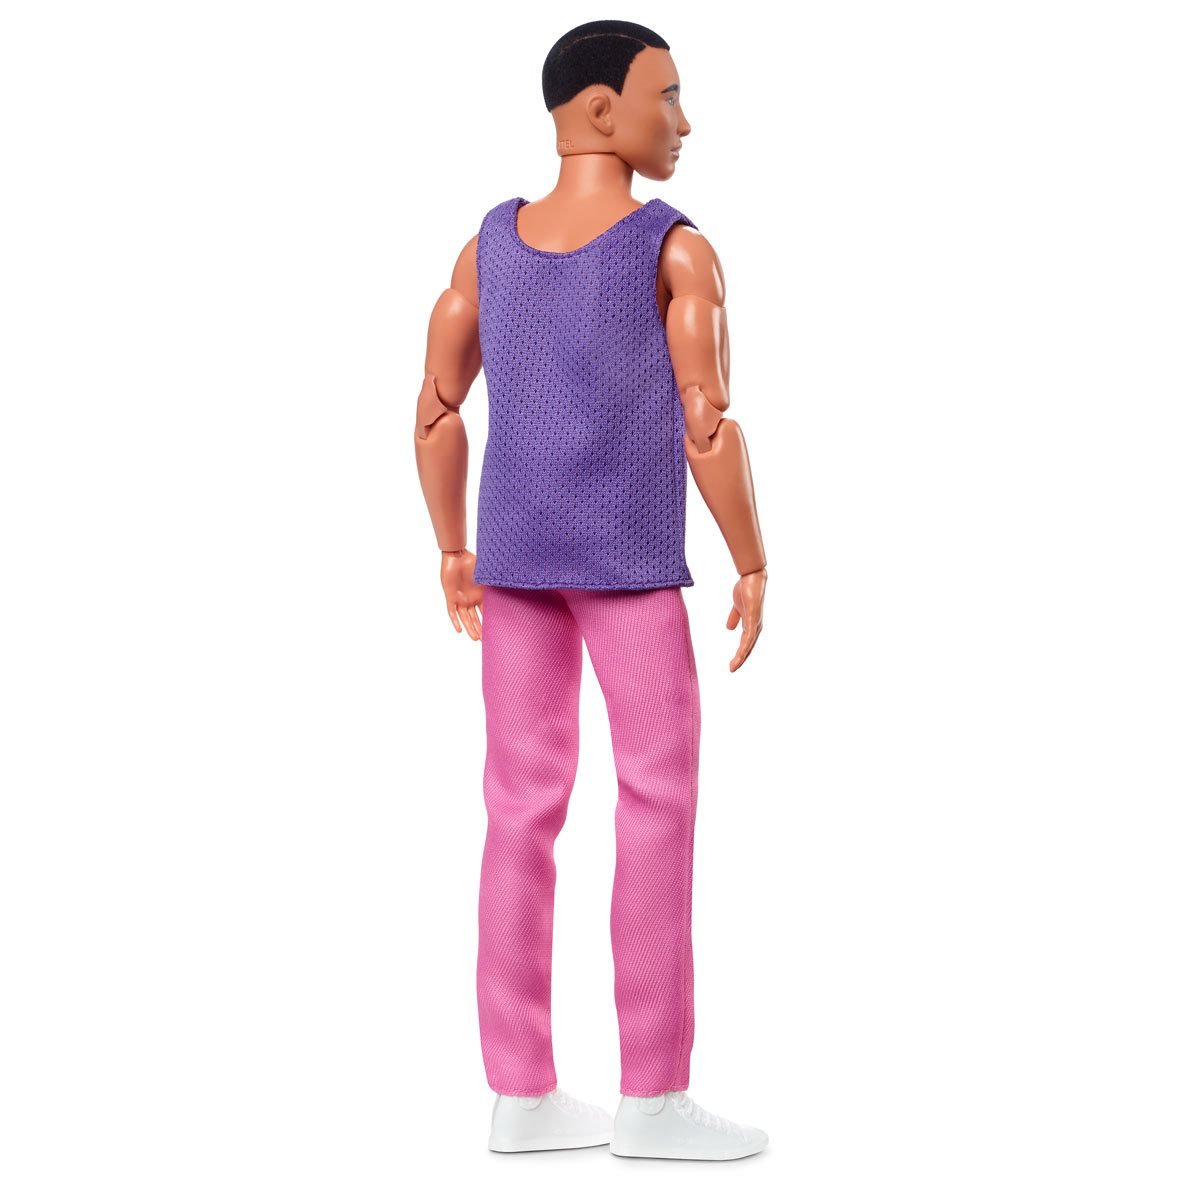 Buy Barbie Made To Move Doll - Pink Top from £16.99 (Today) – Best Deals on